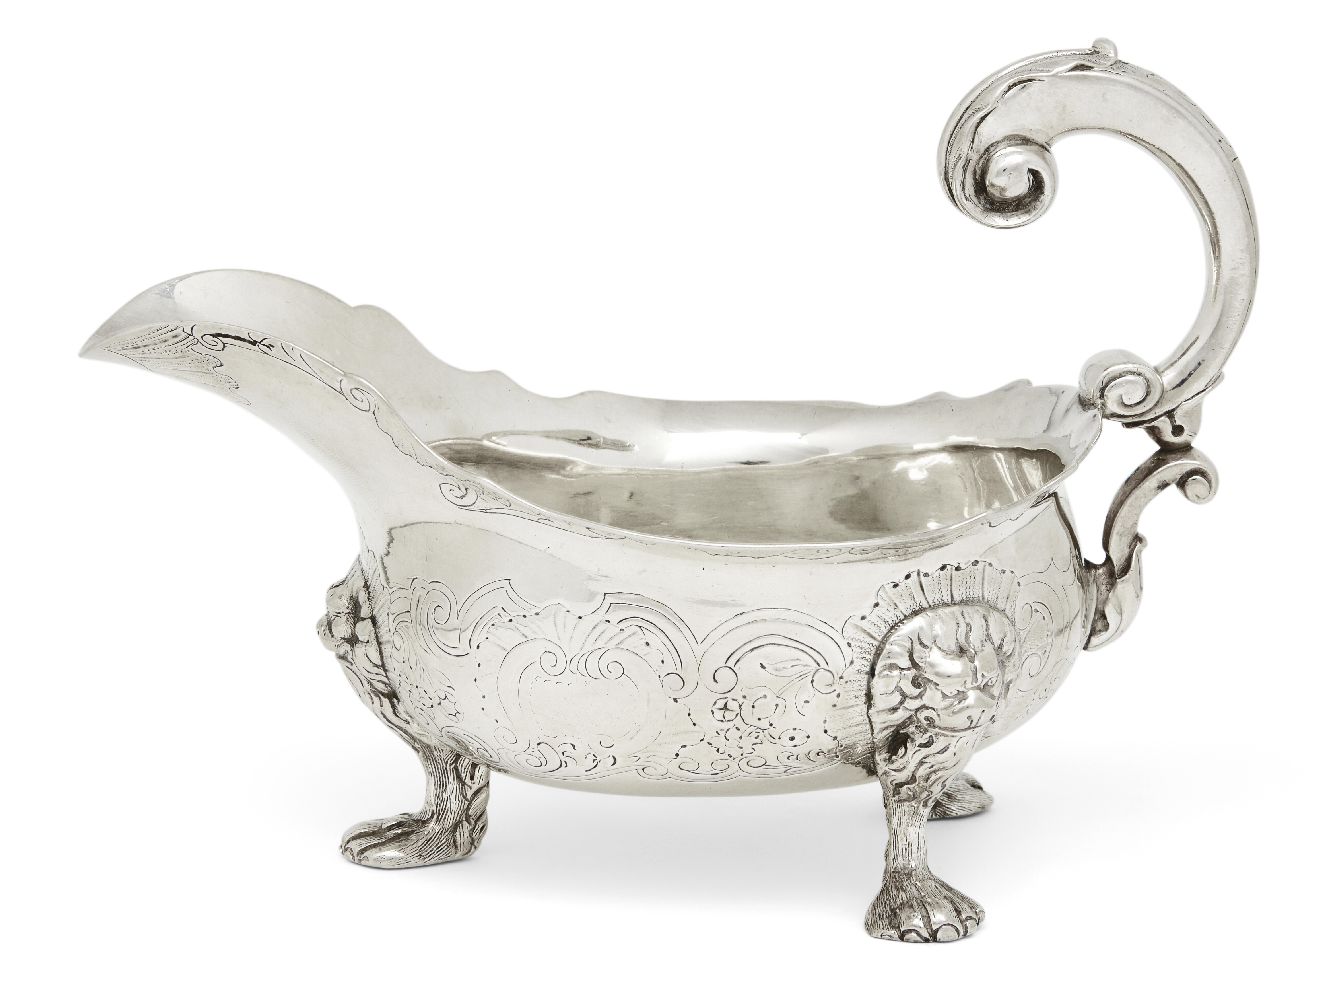 A George II silver sauce boat, London, c.1748, maker's mark rubbed, designed with three paw feet